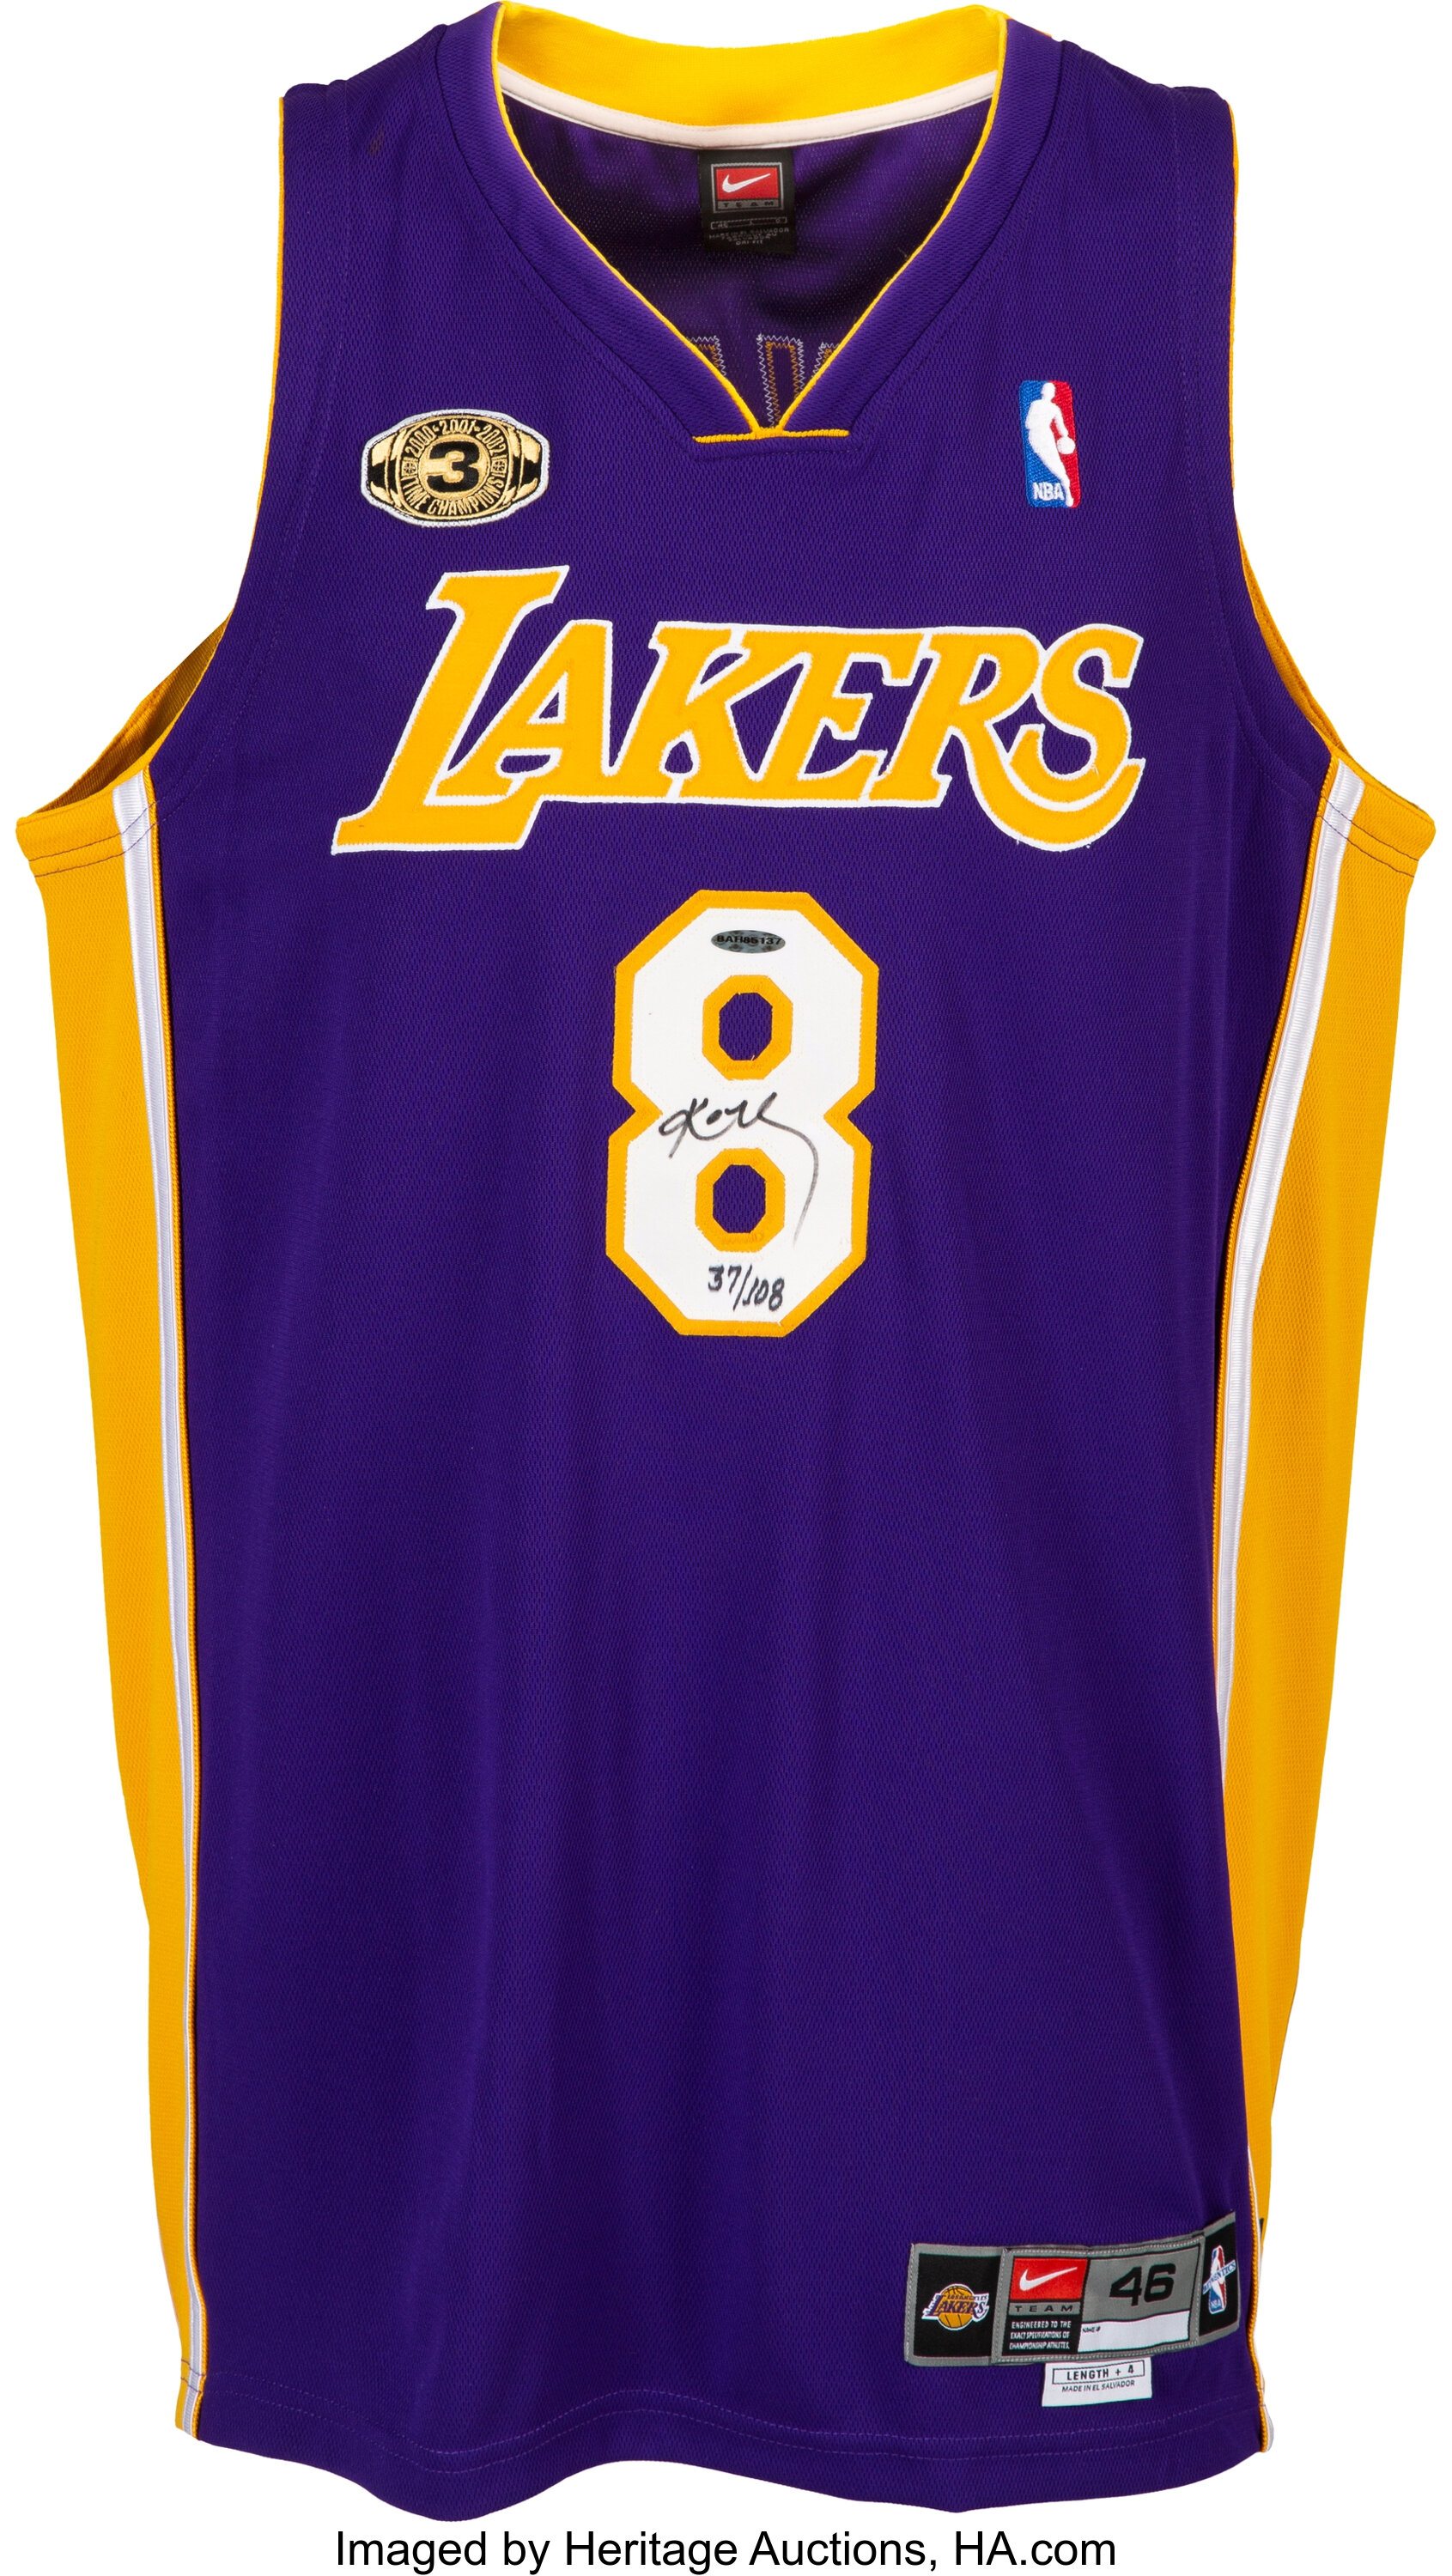 The Lakers' 'Mamba Edition' jerseys are a fan favorite, so how about  applying a similar design to the jerseys worn during most of Kobe's…